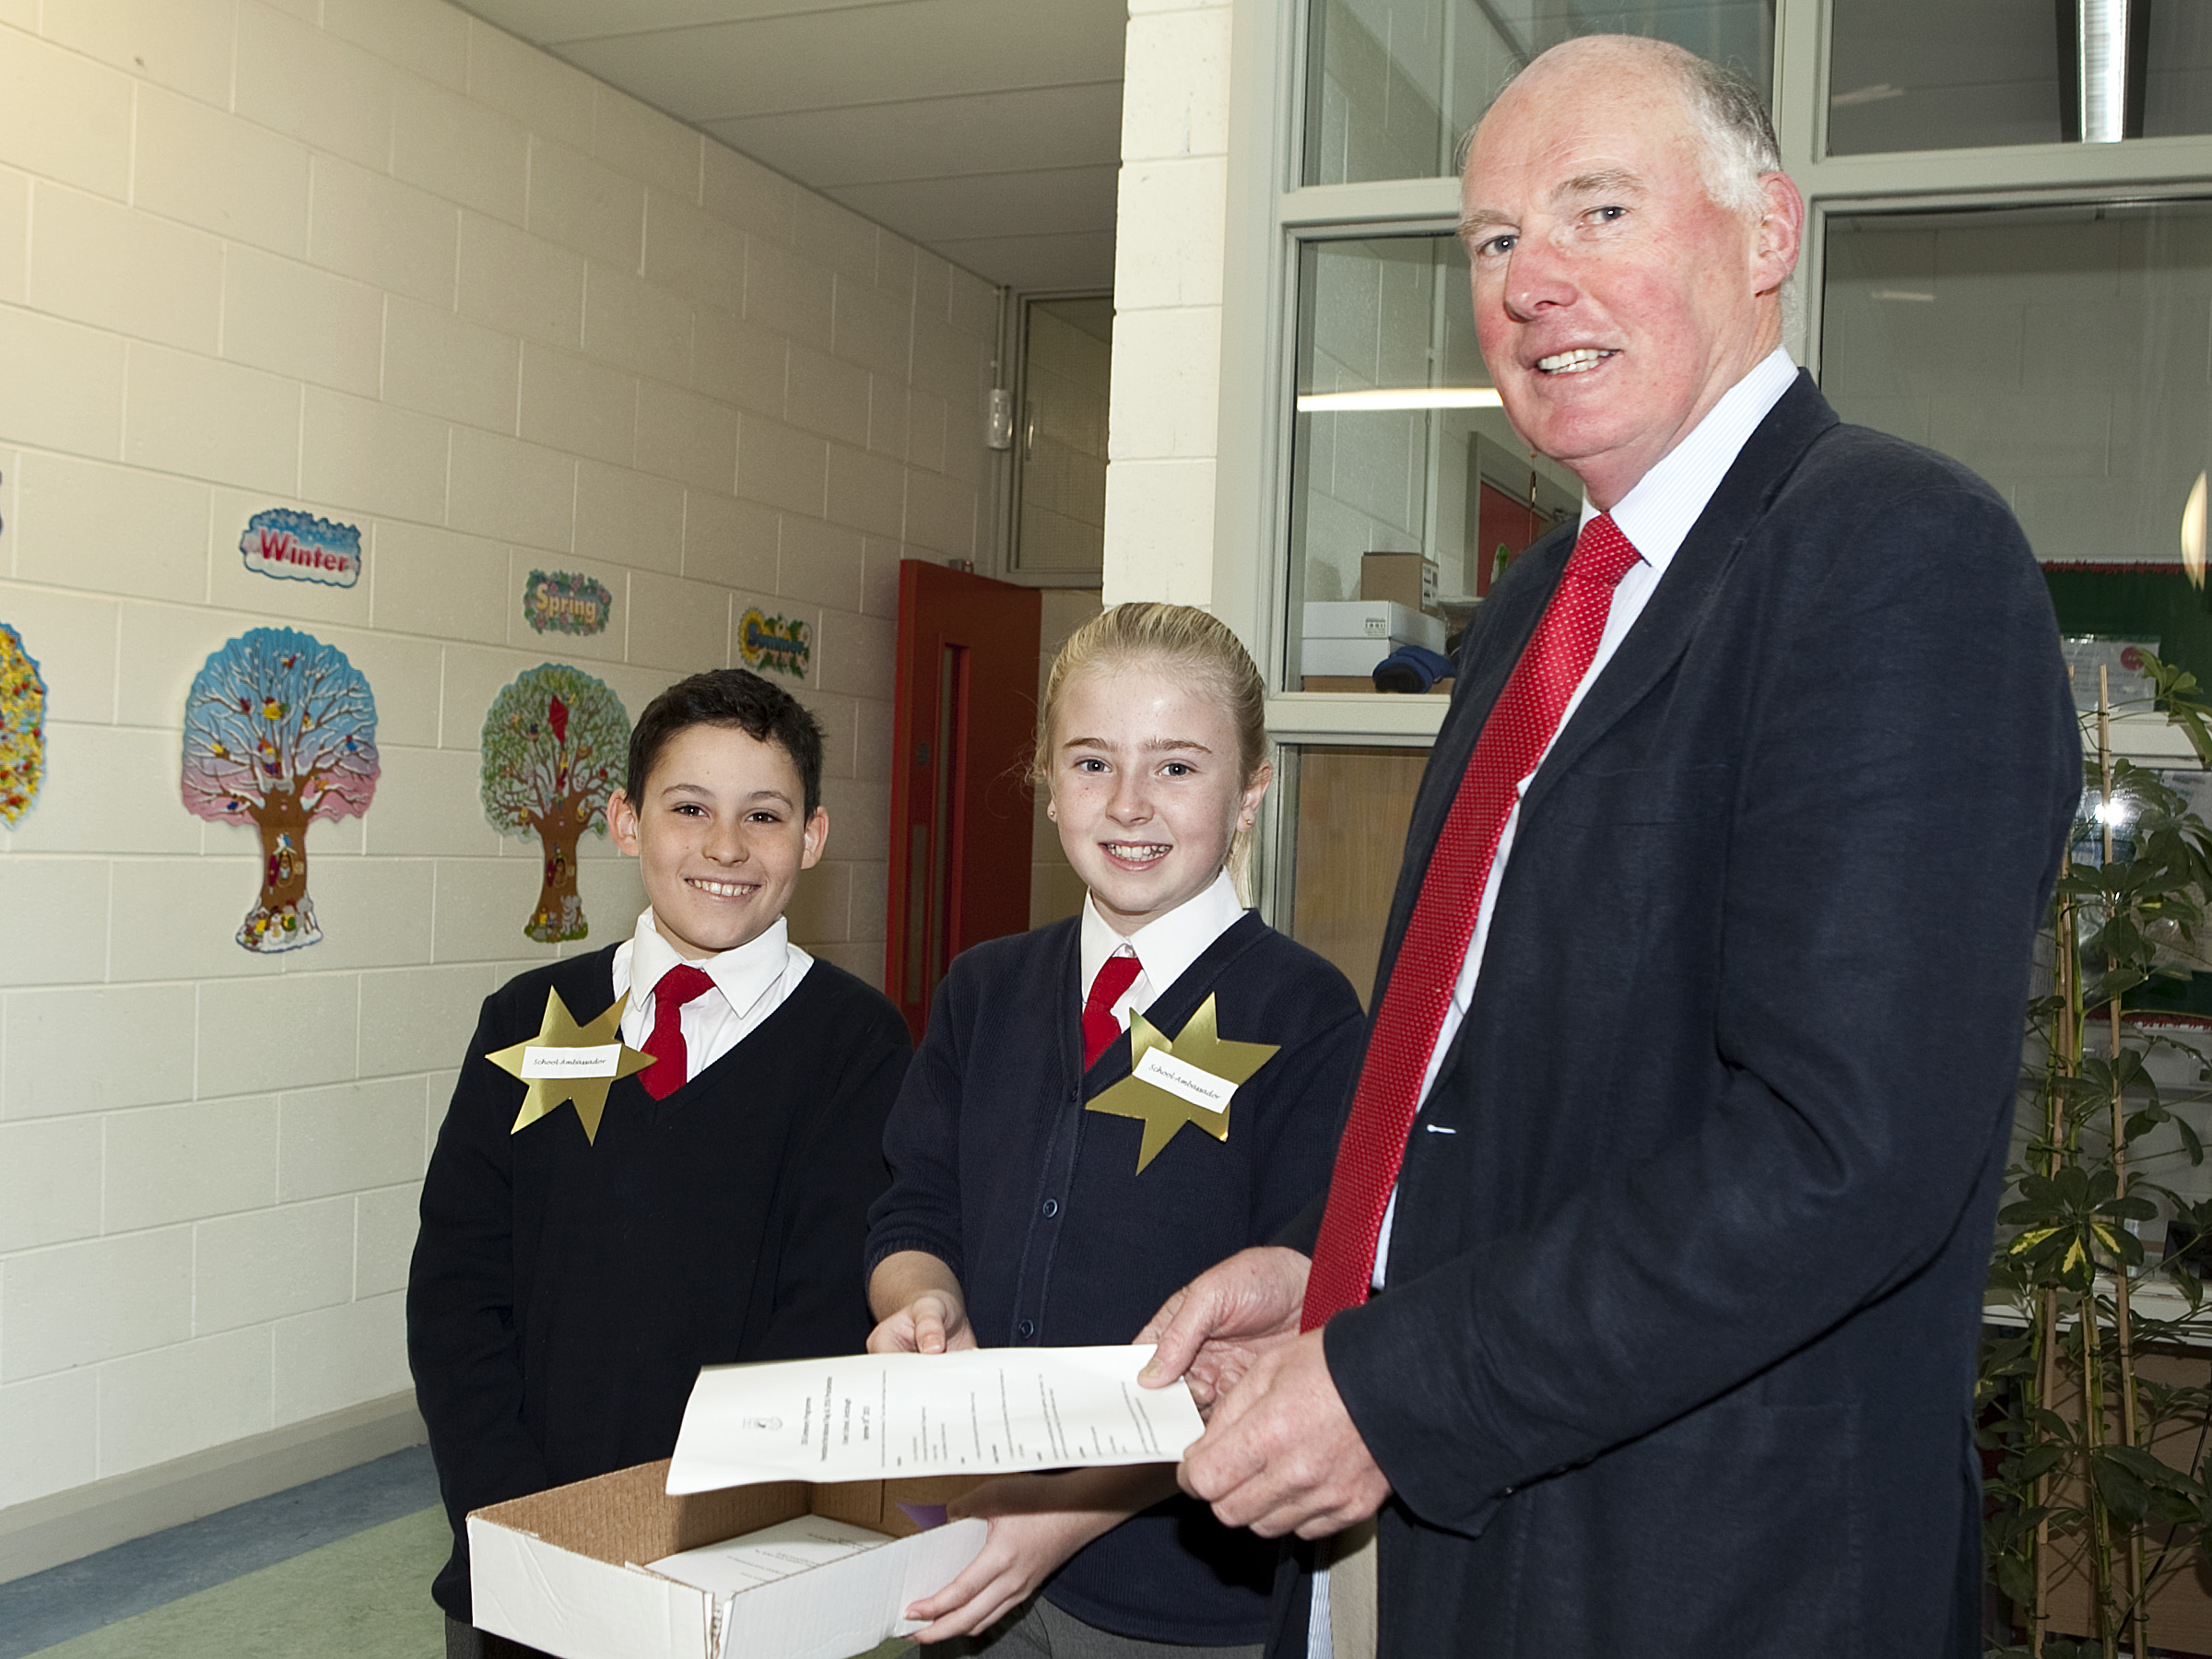 Lt. Col Gerry O\'Gorman (Rtd) is greeted by David Rogan and Claudia Murray -two school ambassadors from 6h class - as he arrives at St. Anne\'s School, Ardclough for the Presentation of the National Flag and 1916 Proclamation to the school.